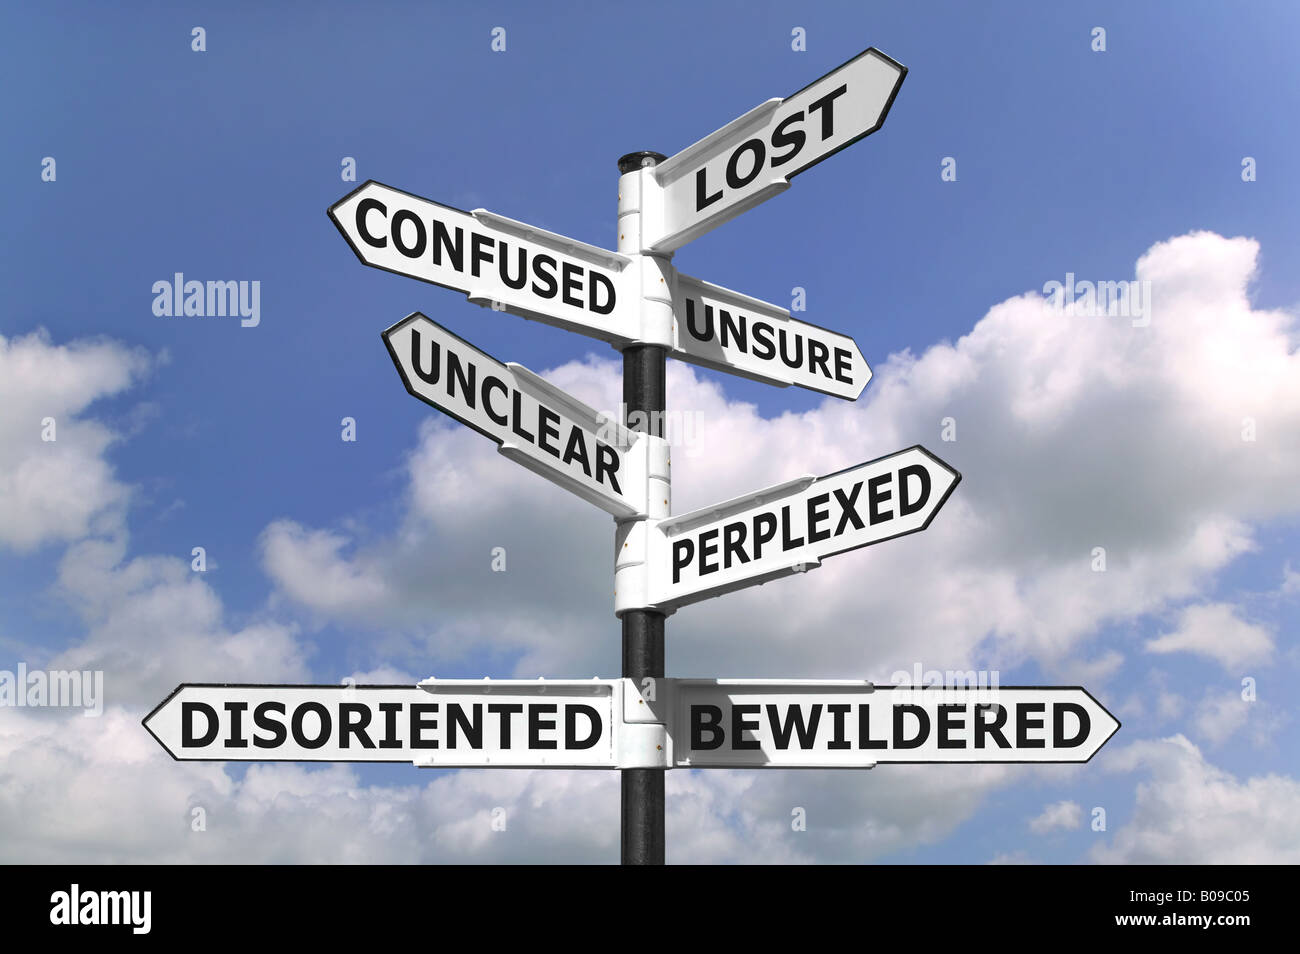 Concept image of a lost and confused signpost against a blue cloudy sky Stock Photo